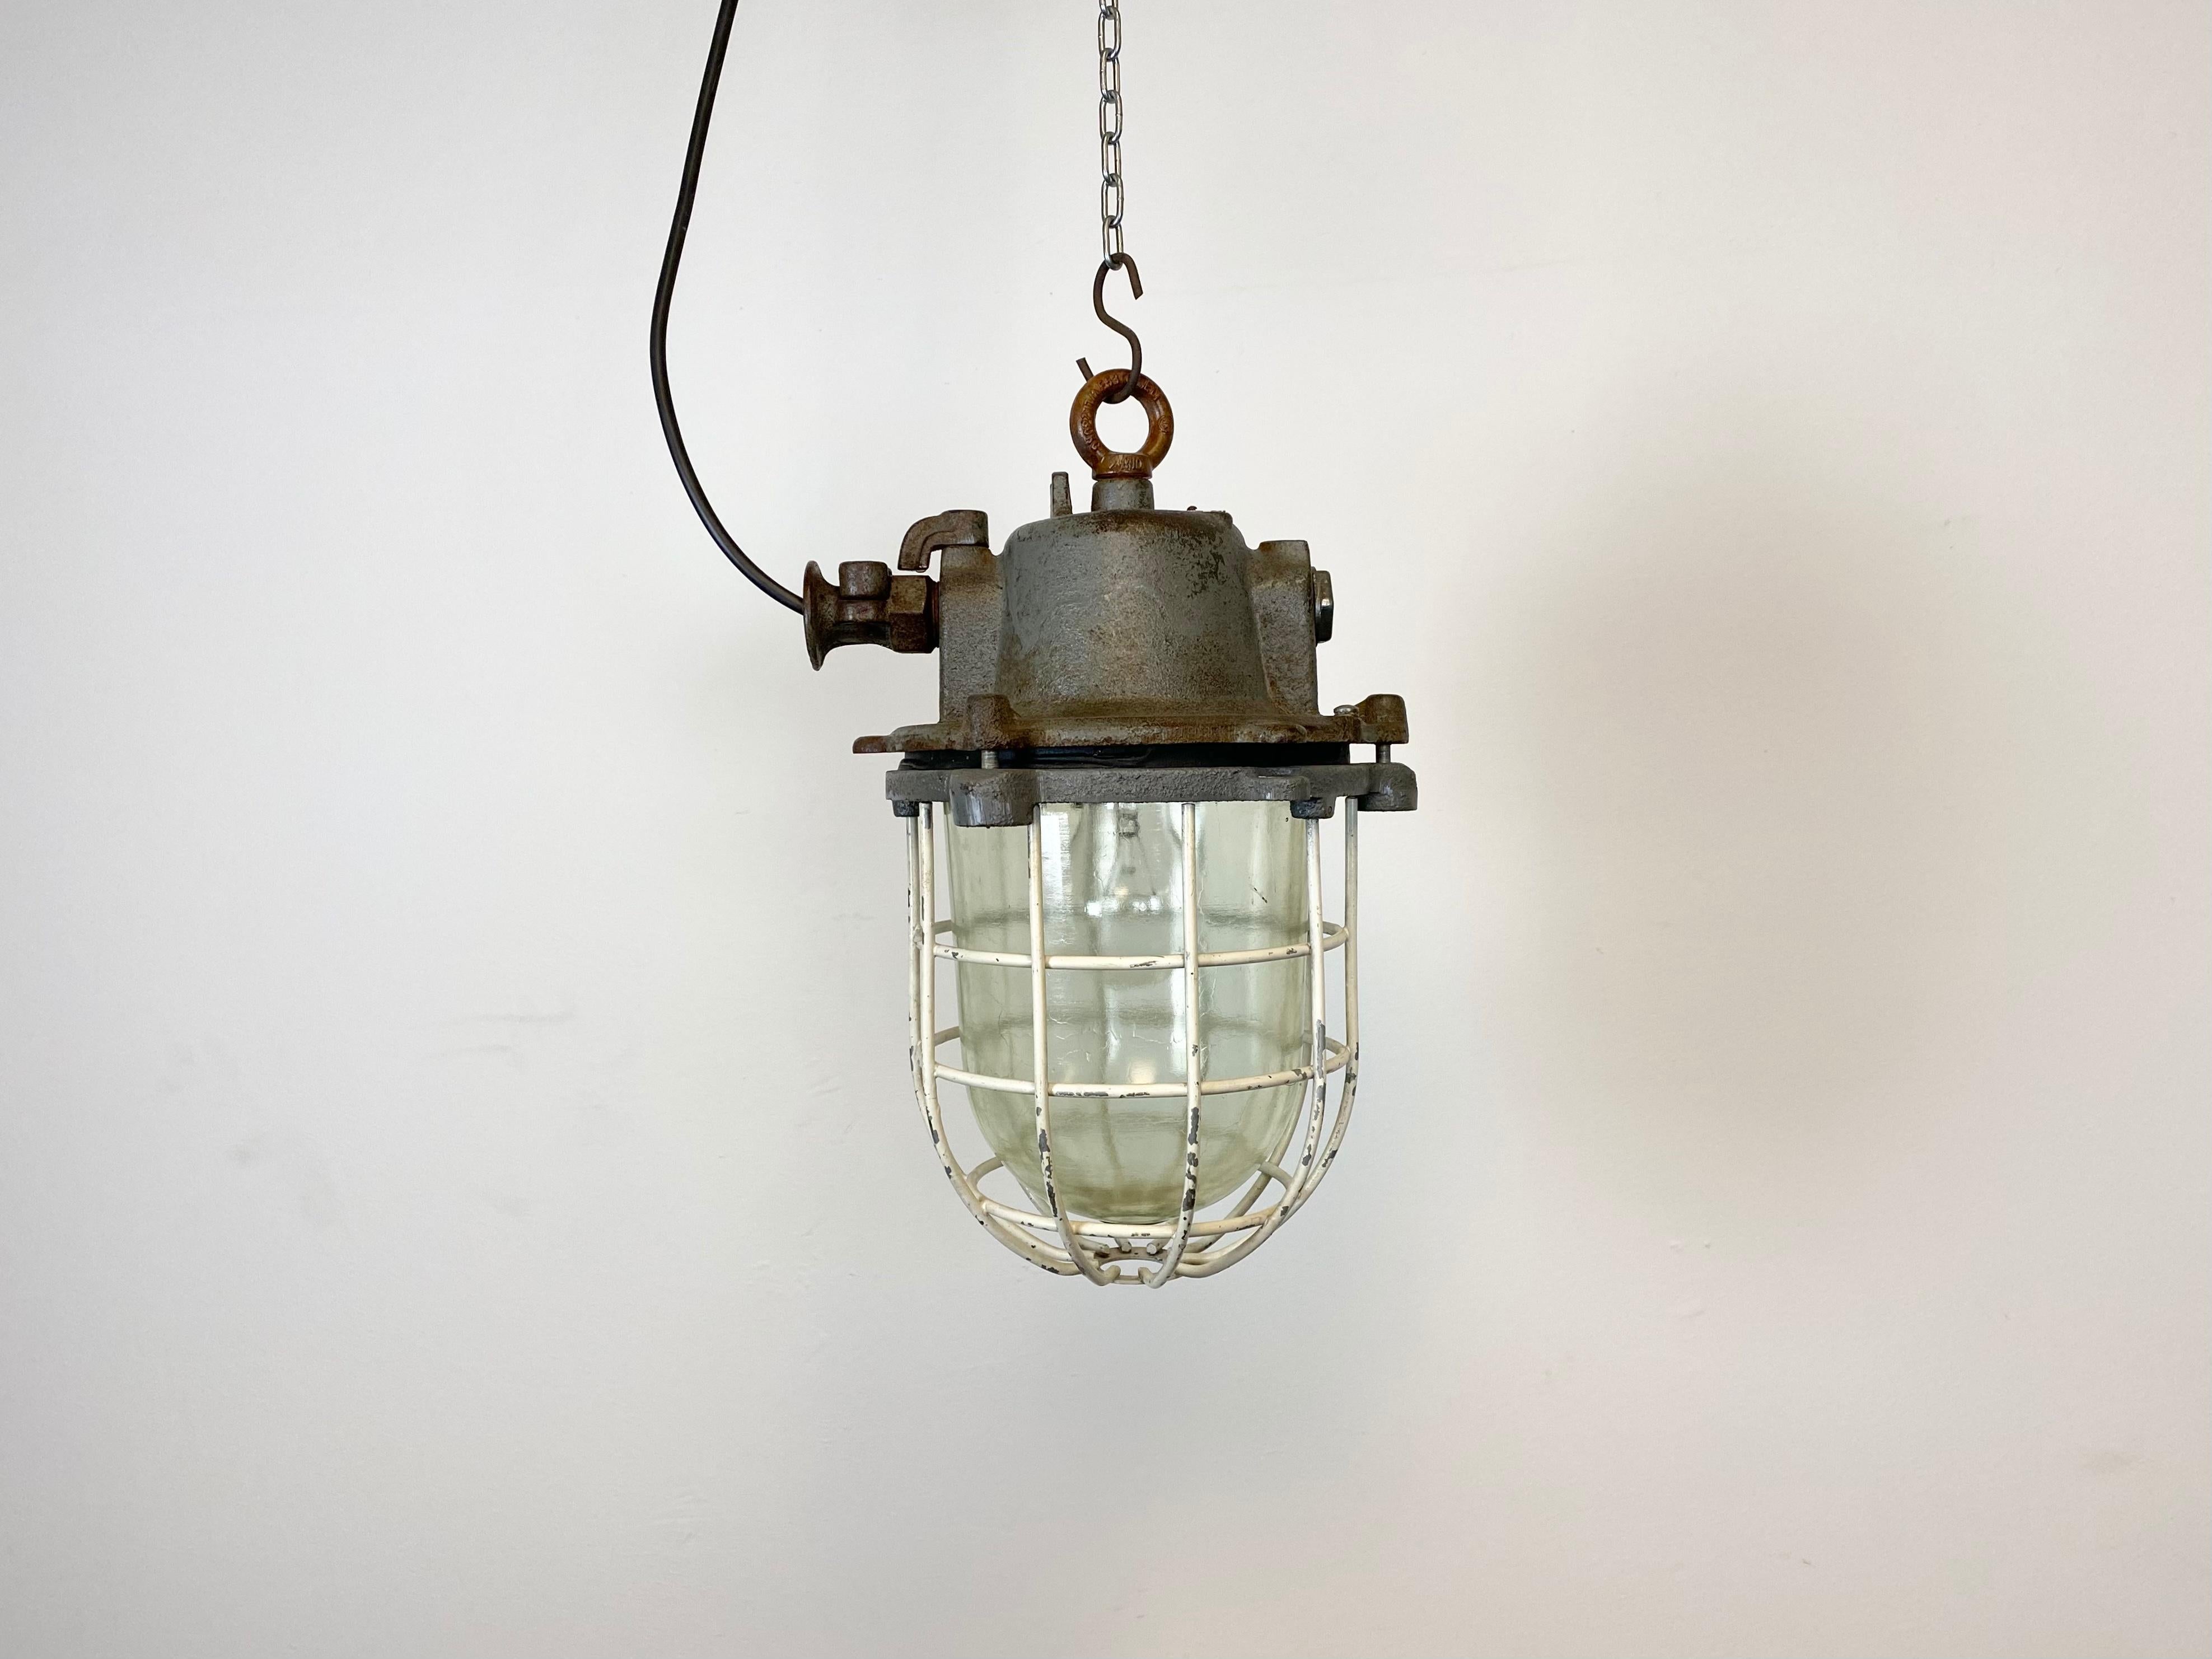 Industrial hanging lamp made by Elektrosvit in former Czechoslovakia during the 1970s. It features cast iron top, clear glass cover and iron grid. Porcelain socket for E 27 lightbulbs and new wire. The weight of the lamp is 8 kg.